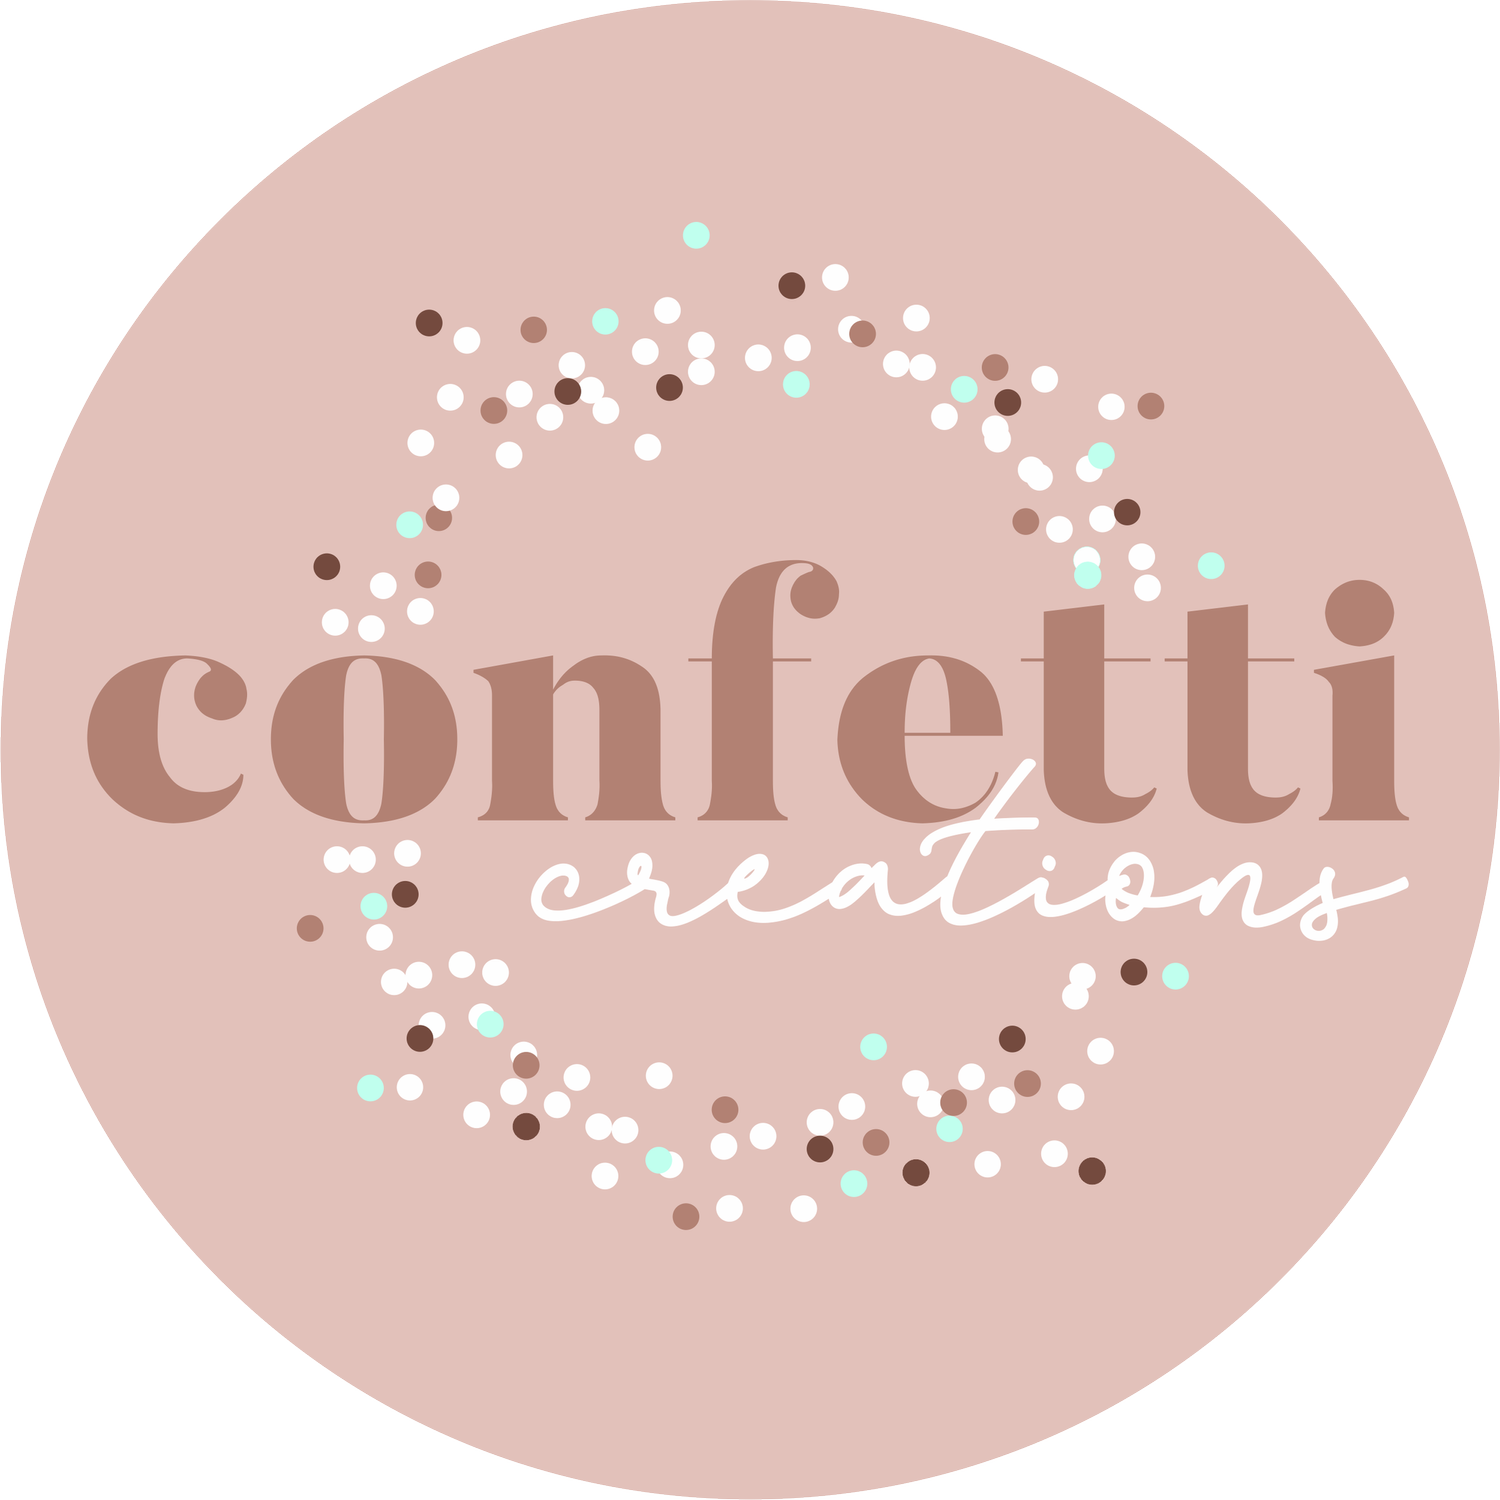 Confetti Creations Mackay | Backdrop hire, Weddings and Events, Invitations, Coolers, Signage, Personalised Gifts + more